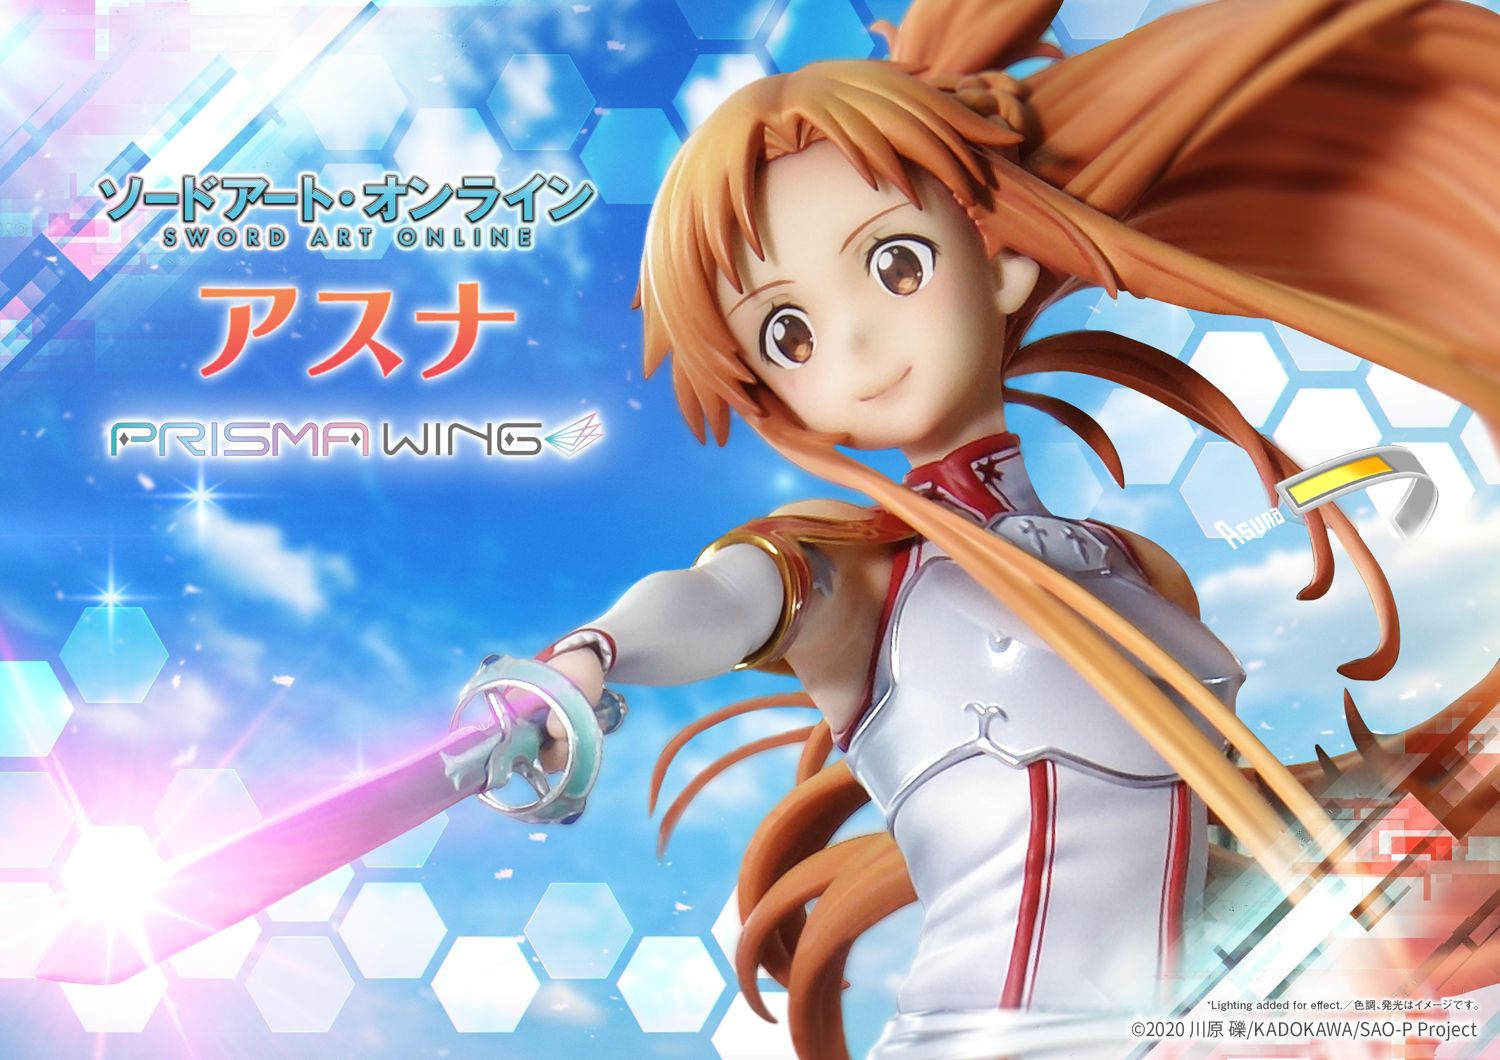 Sword Art Online's live action series will not be whitewashed